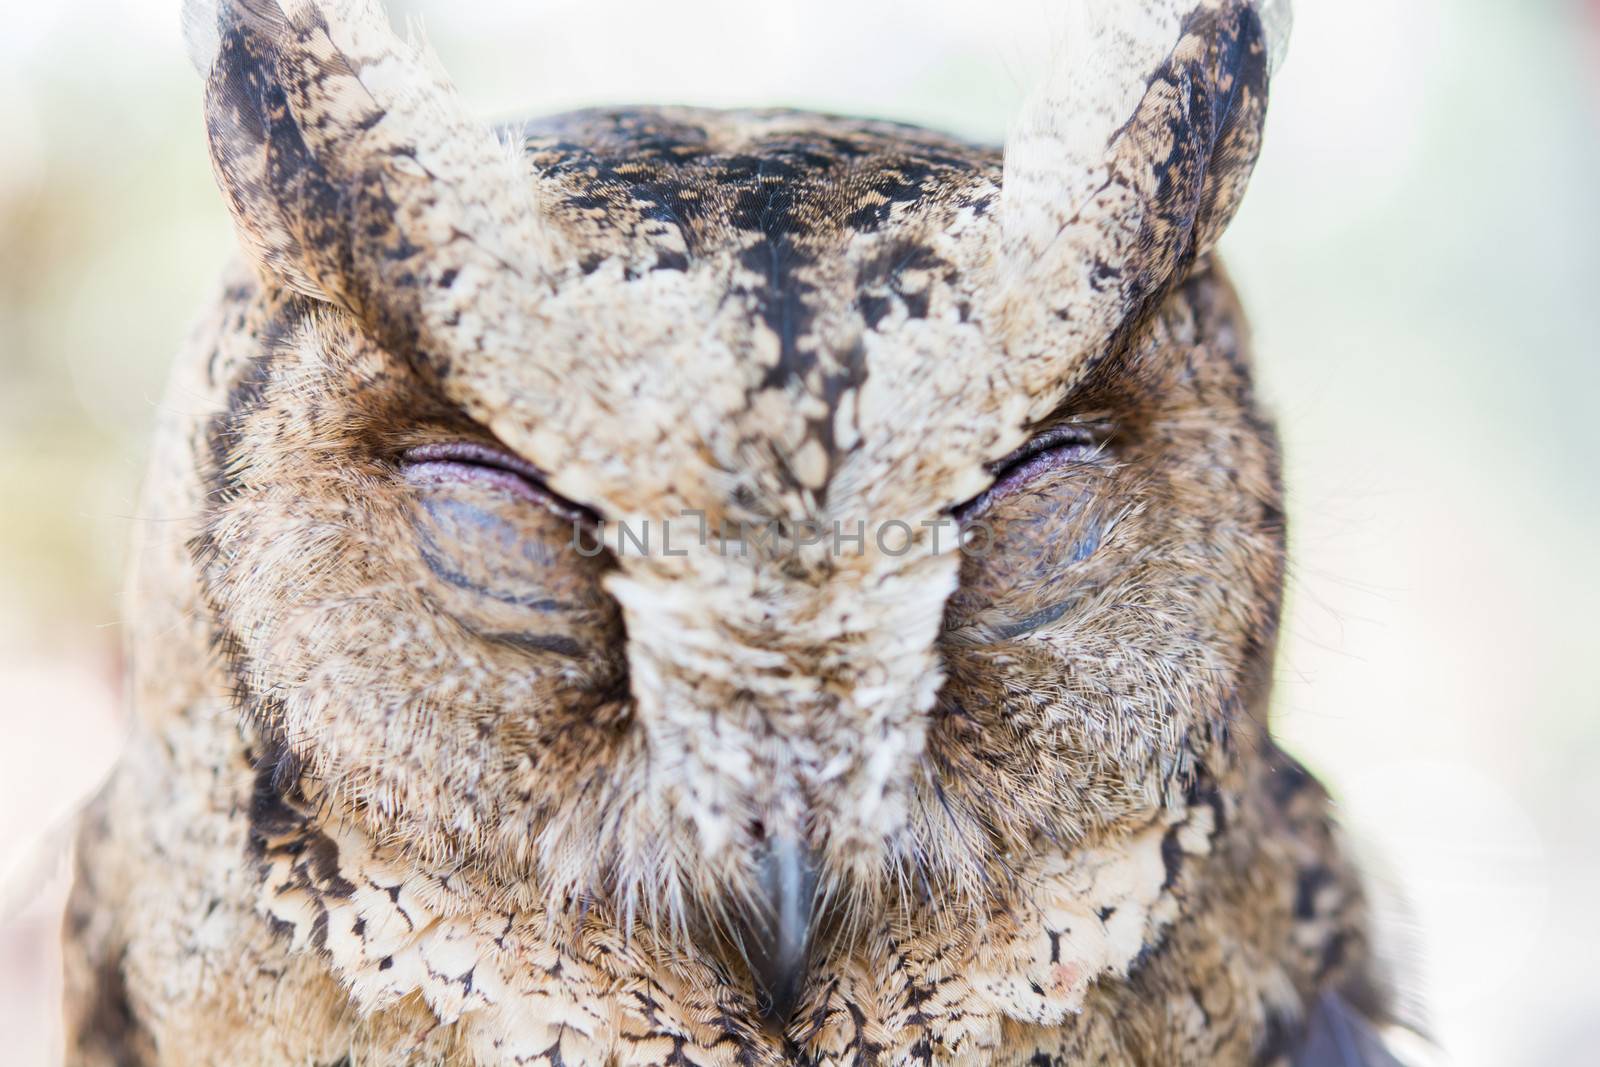 close up of an owl be cute